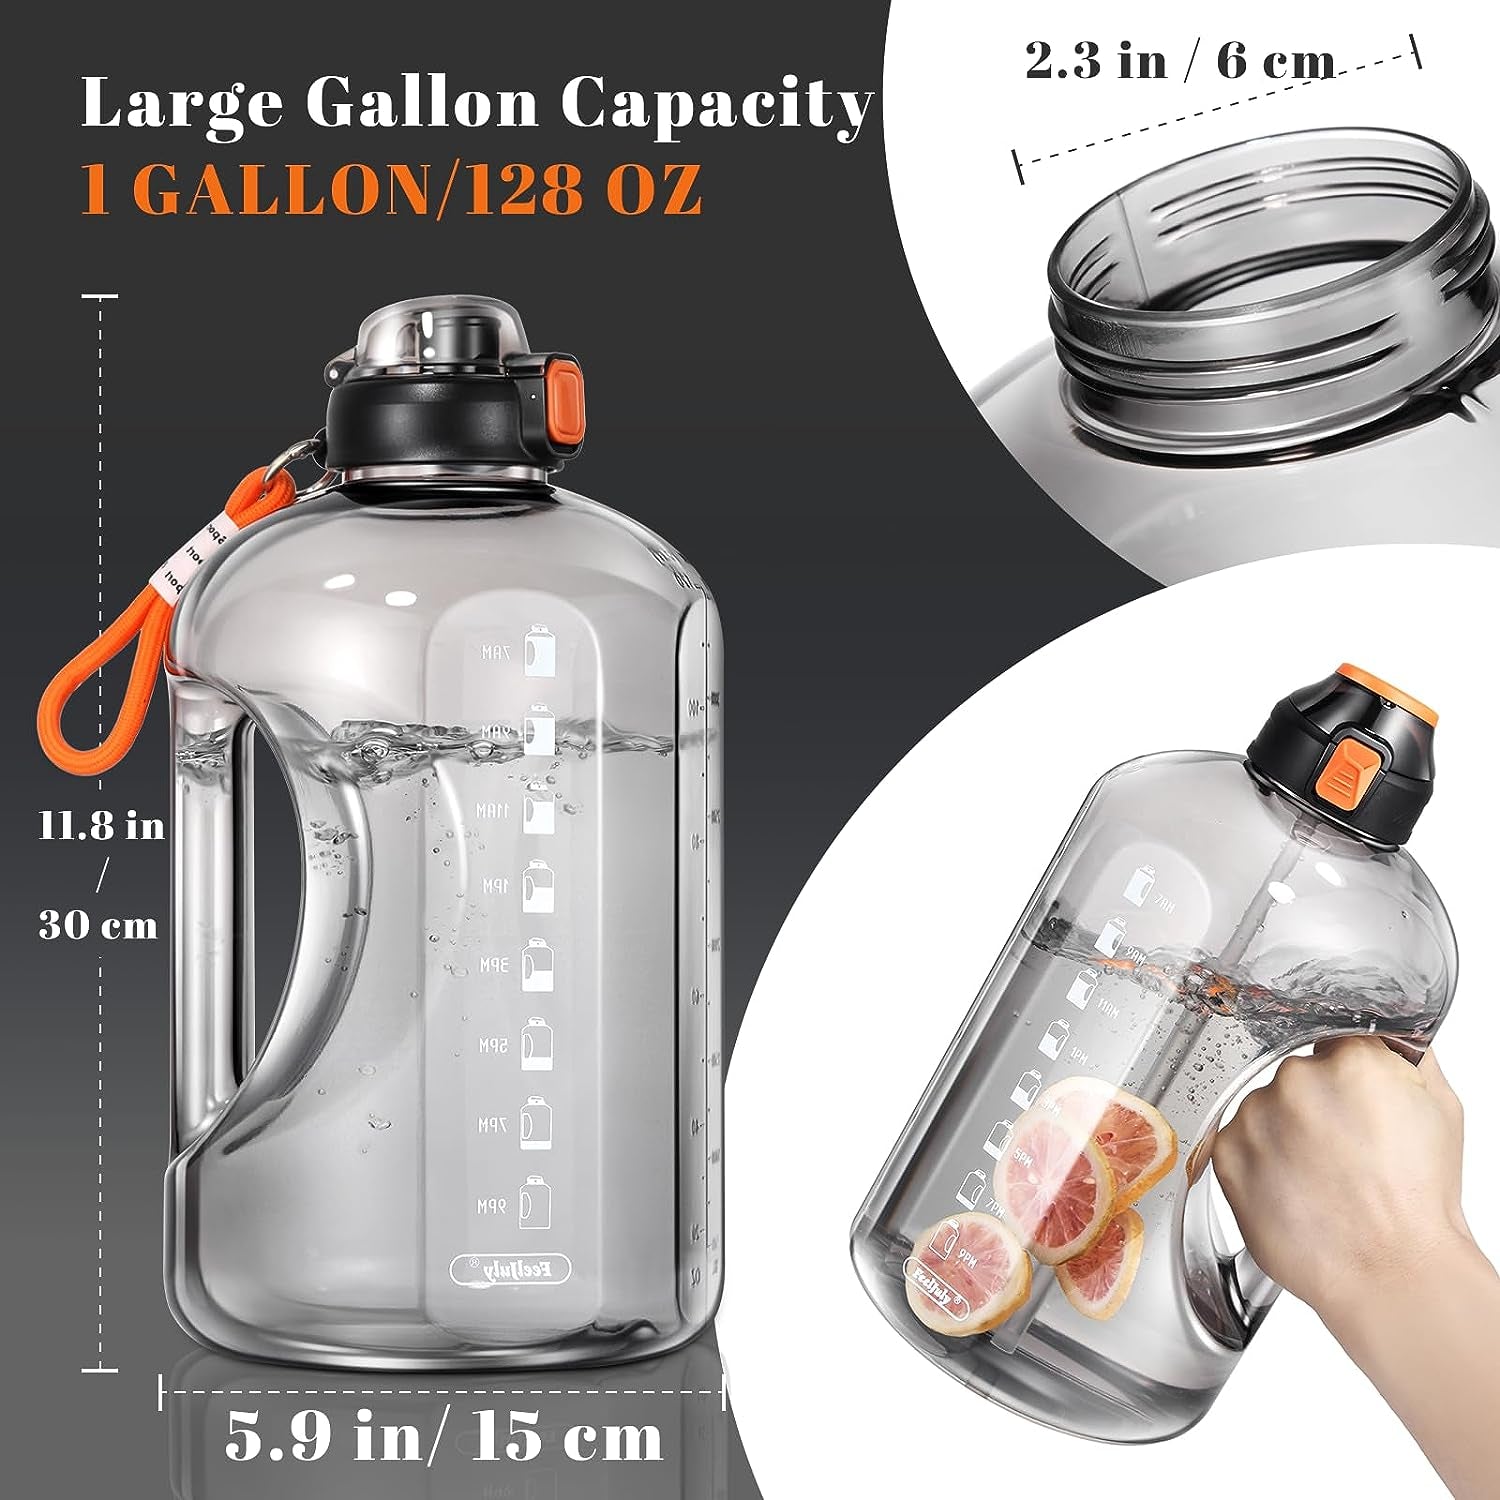 1 Gallon Water Bottle with Straw, 128 Oz Large Water Bottles with Times to Drink, Reusable Leak Proof Water Bottle Jug with Handle, 2 Lids BPA Free Big Sports Bottles for Fitness Gym Camping